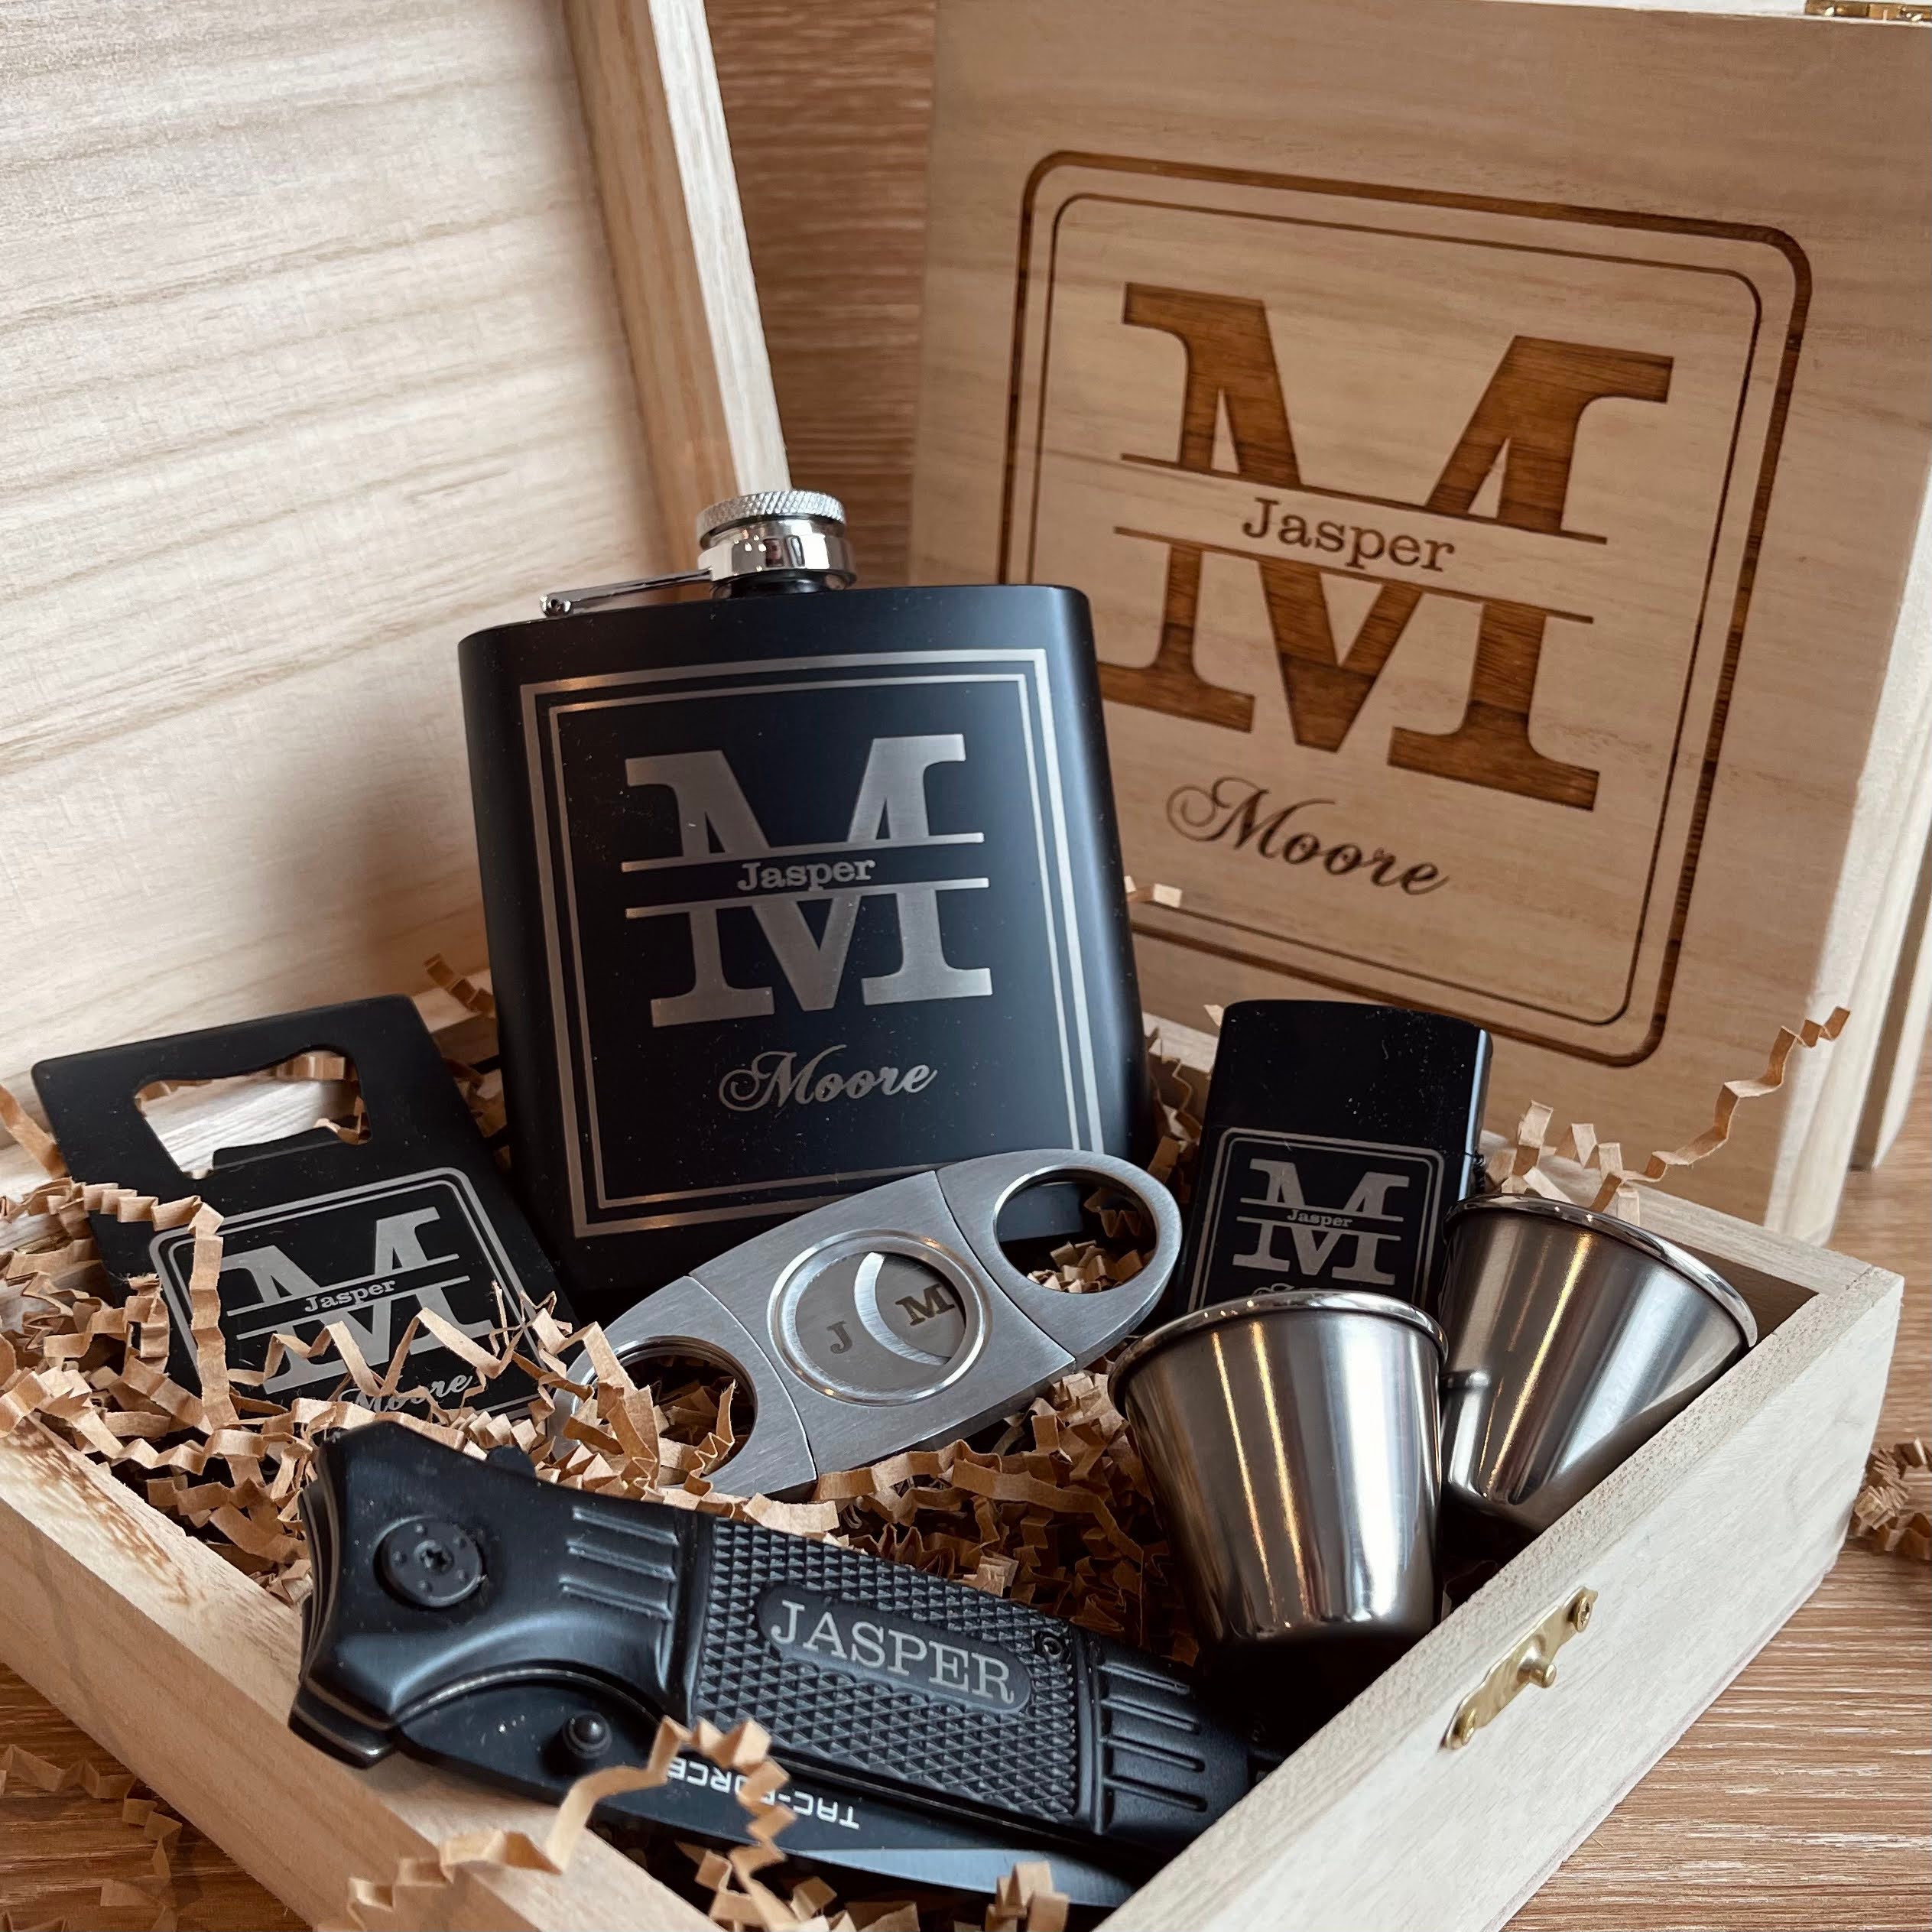 The Mustang Personalized Flask Knife Groomsmen Gift Set Rawhide